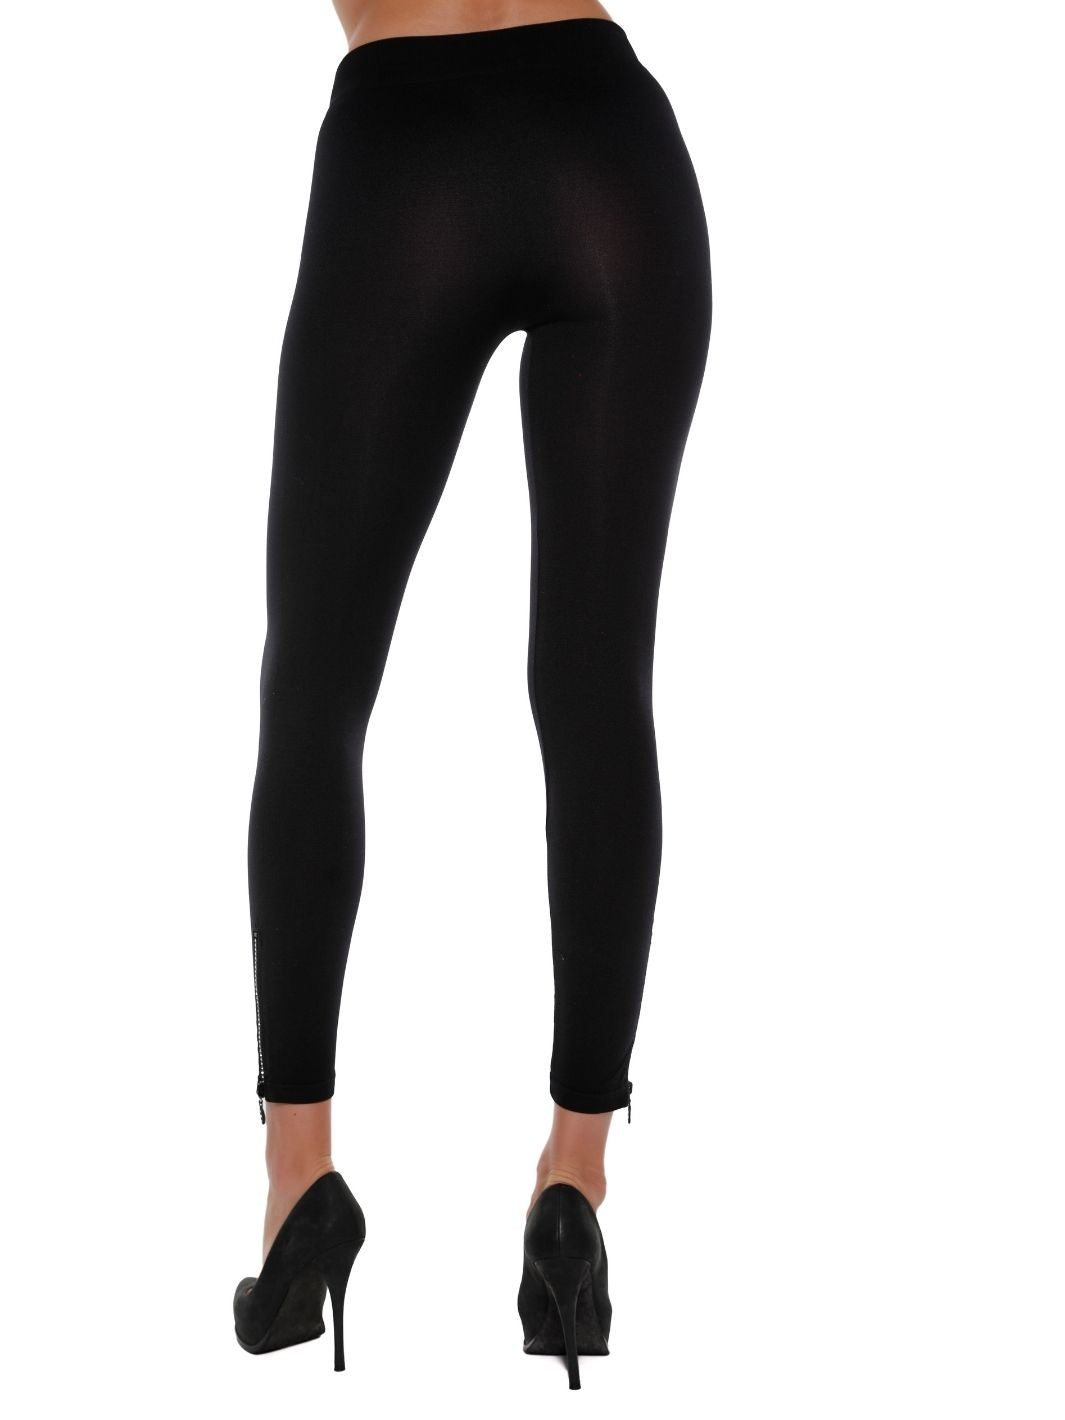 Women's Seamless Fashion Leggings with a Rhinestone Zipper at the Ankle